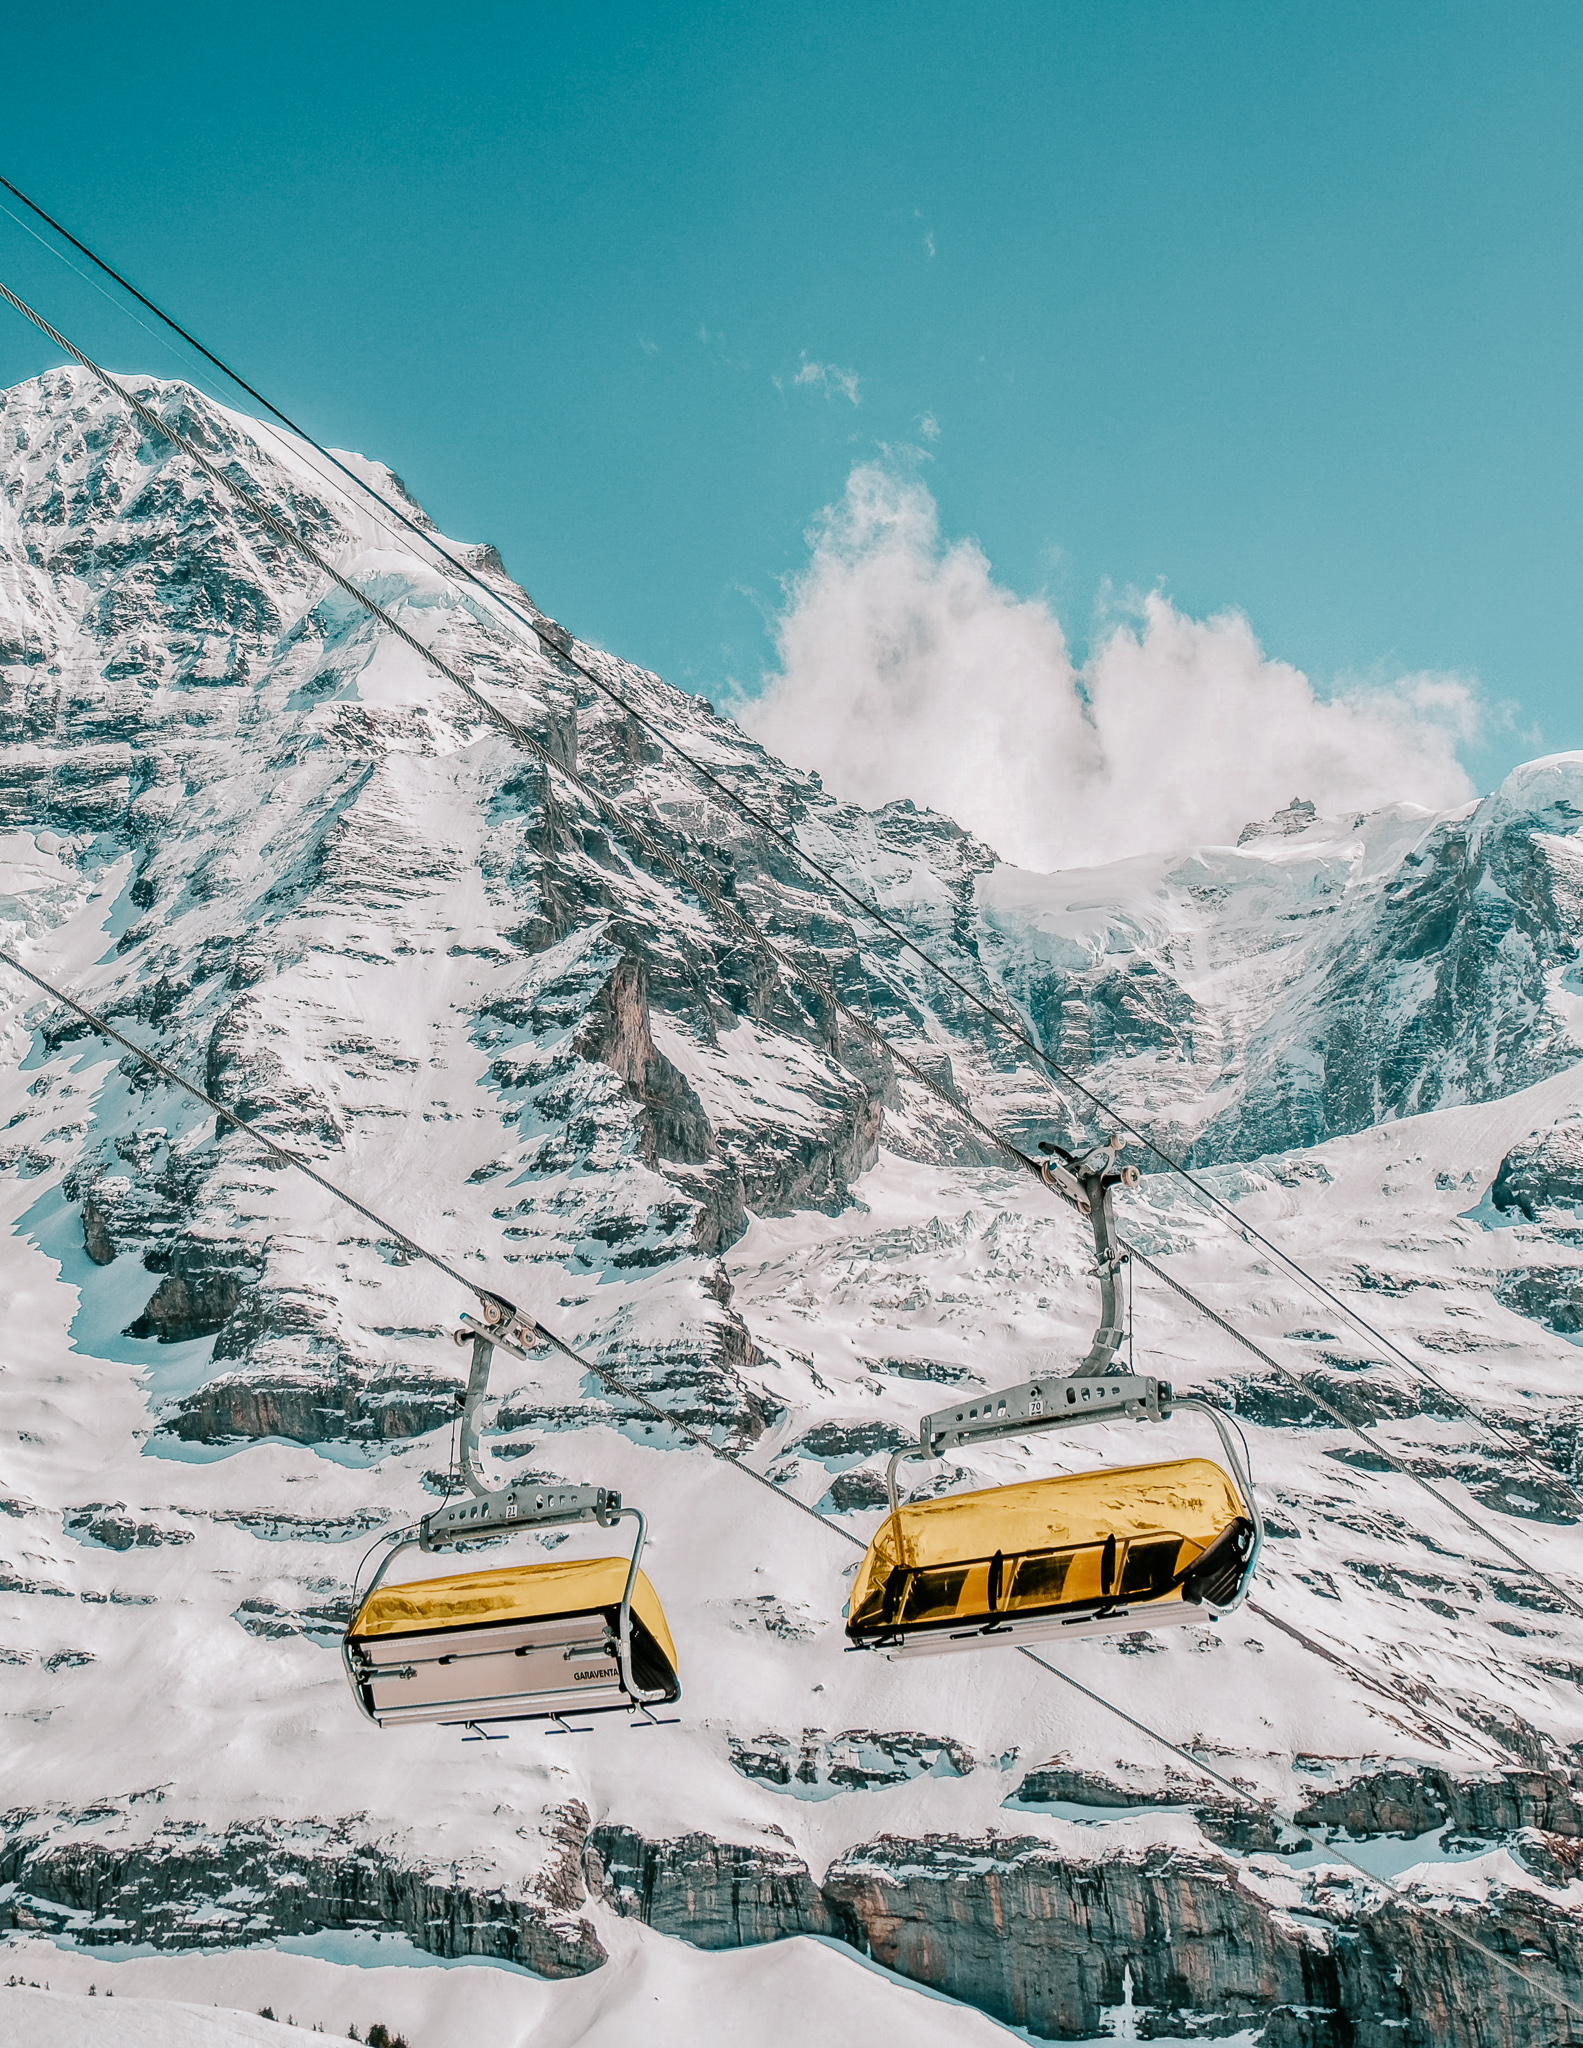 two yellow ski lifts in the Swiss alps in the Jungfrau region